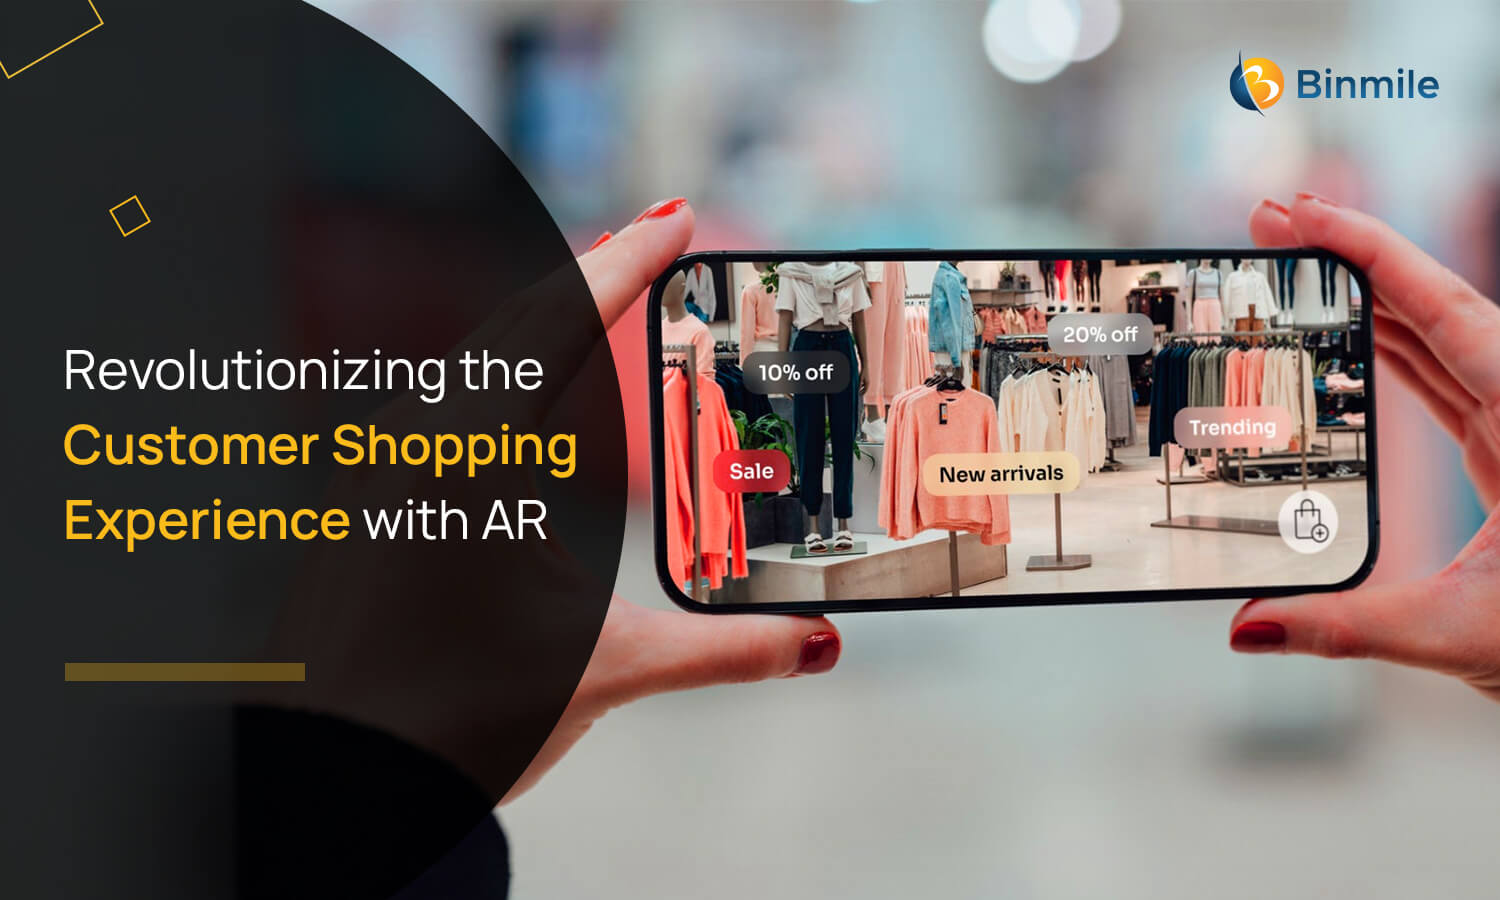 Augmented Reality in Retail: Use Cases & Business Benefits